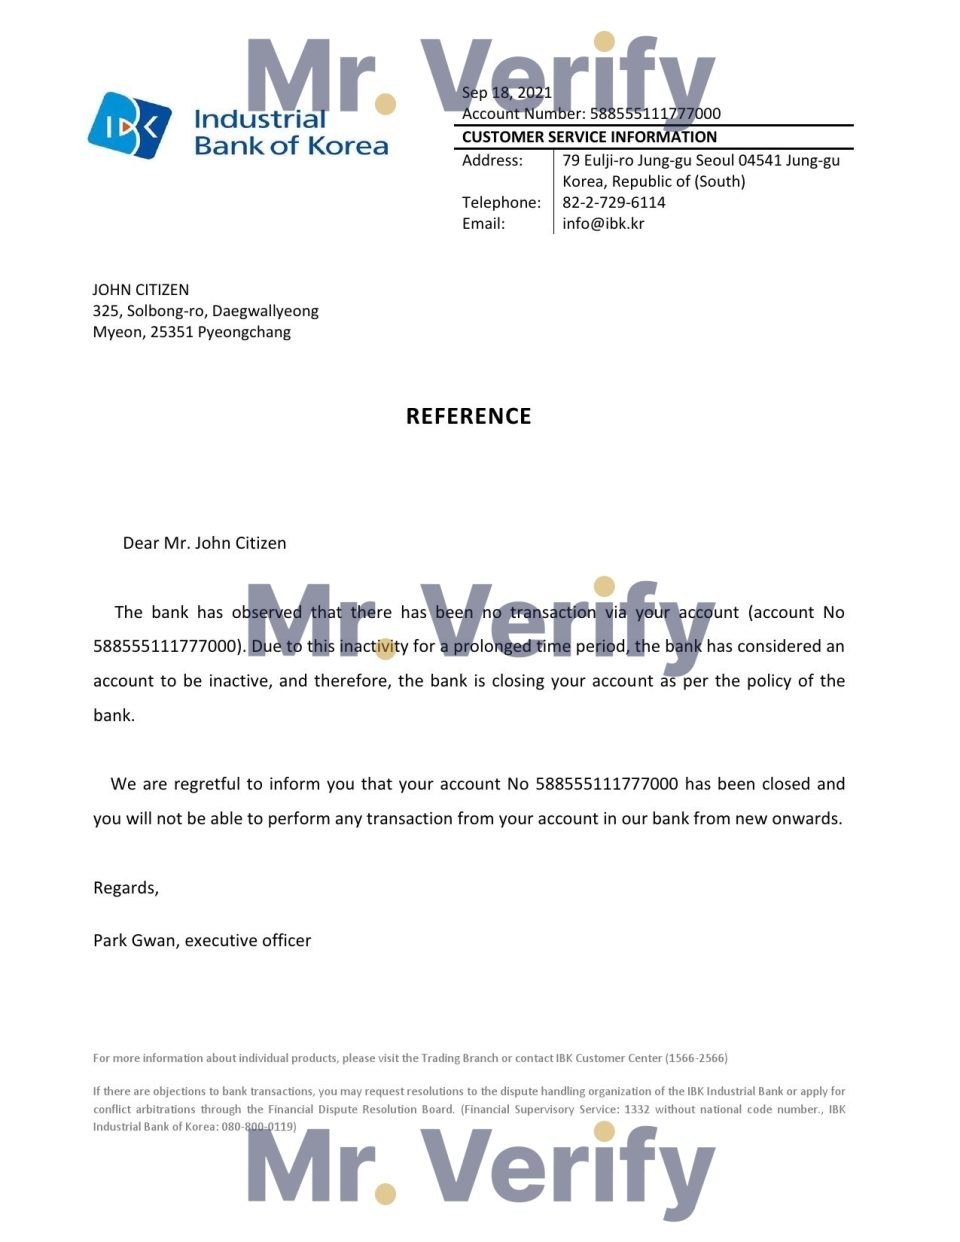 Download Korea Industrial Bank Reference Letter Templates | Editable Word